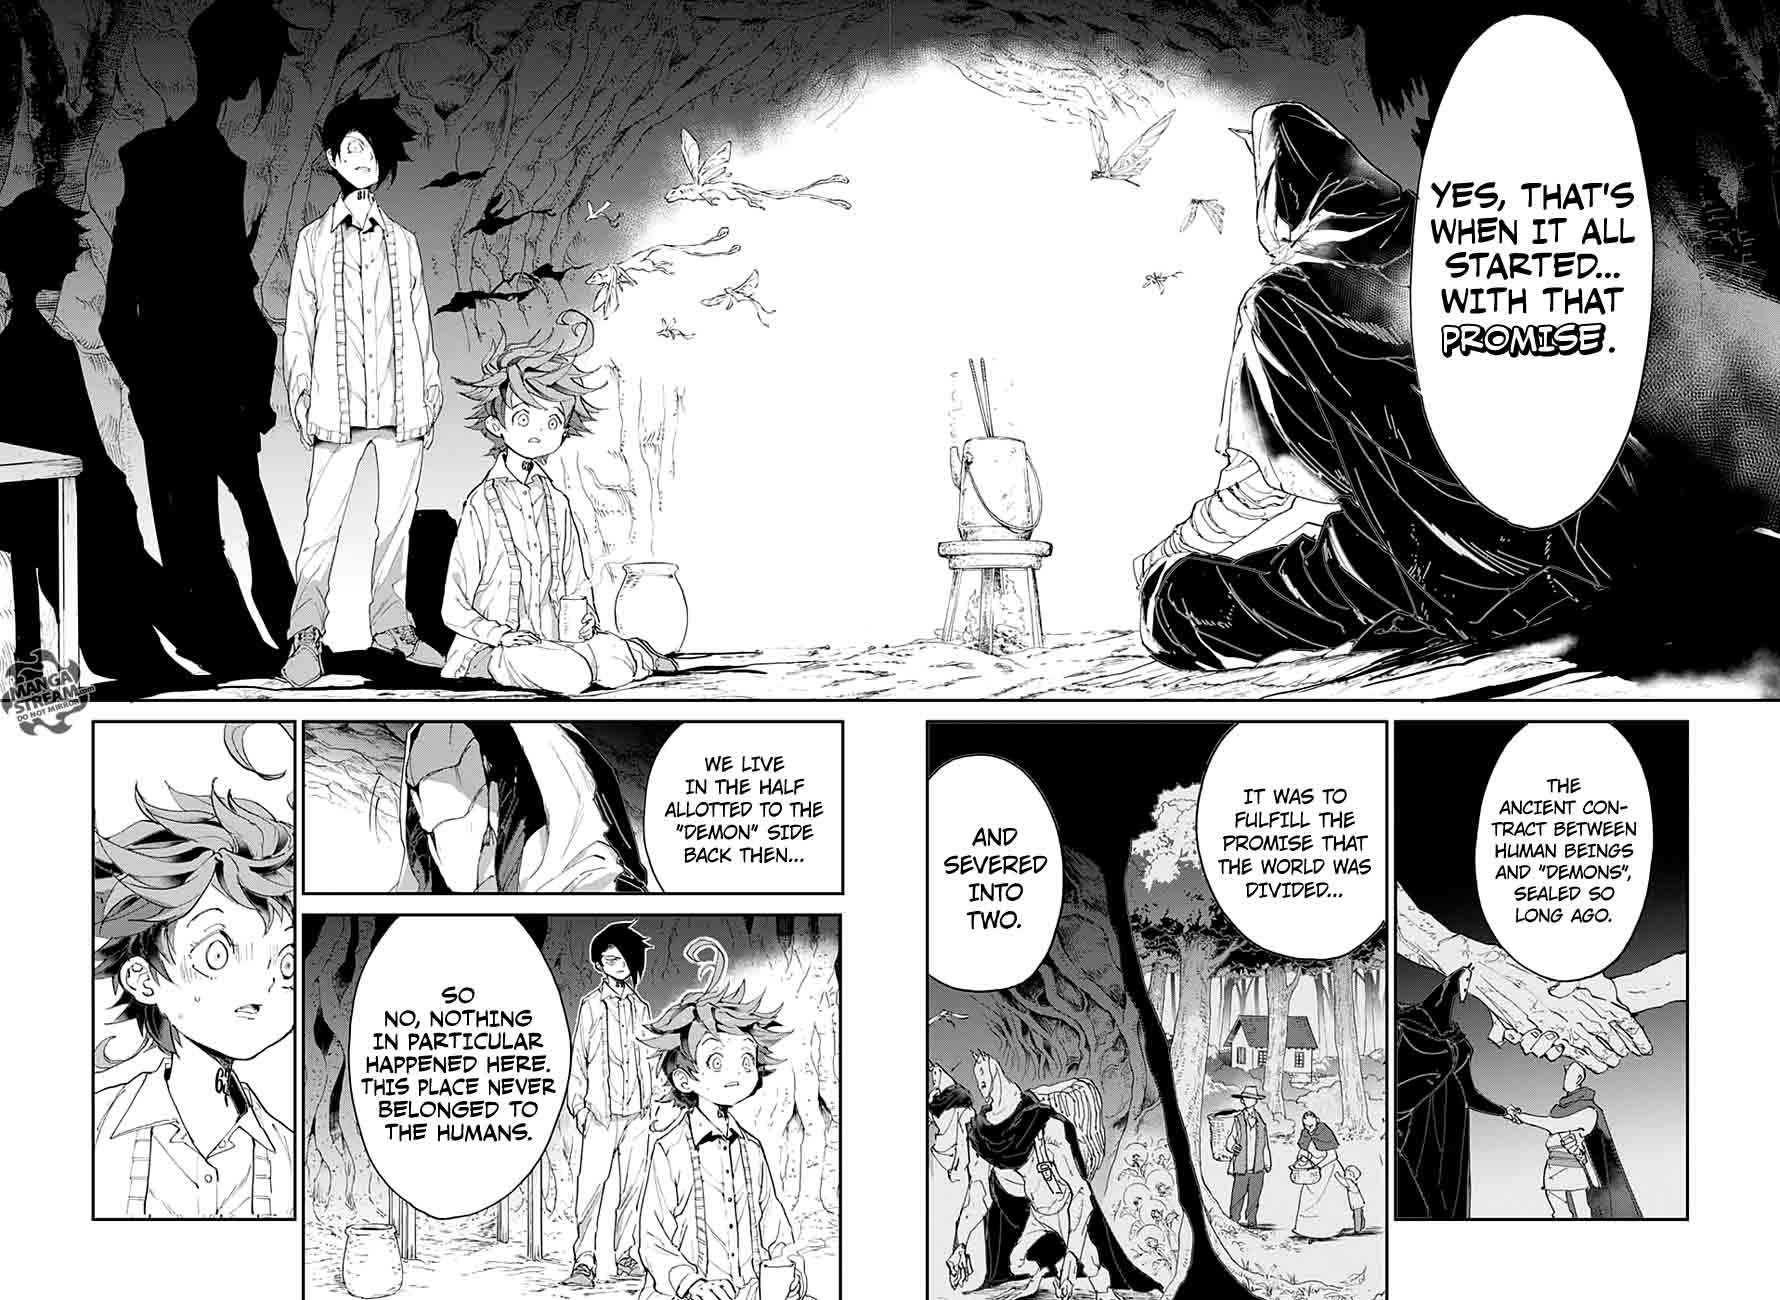 The Promised Neverland 47 8